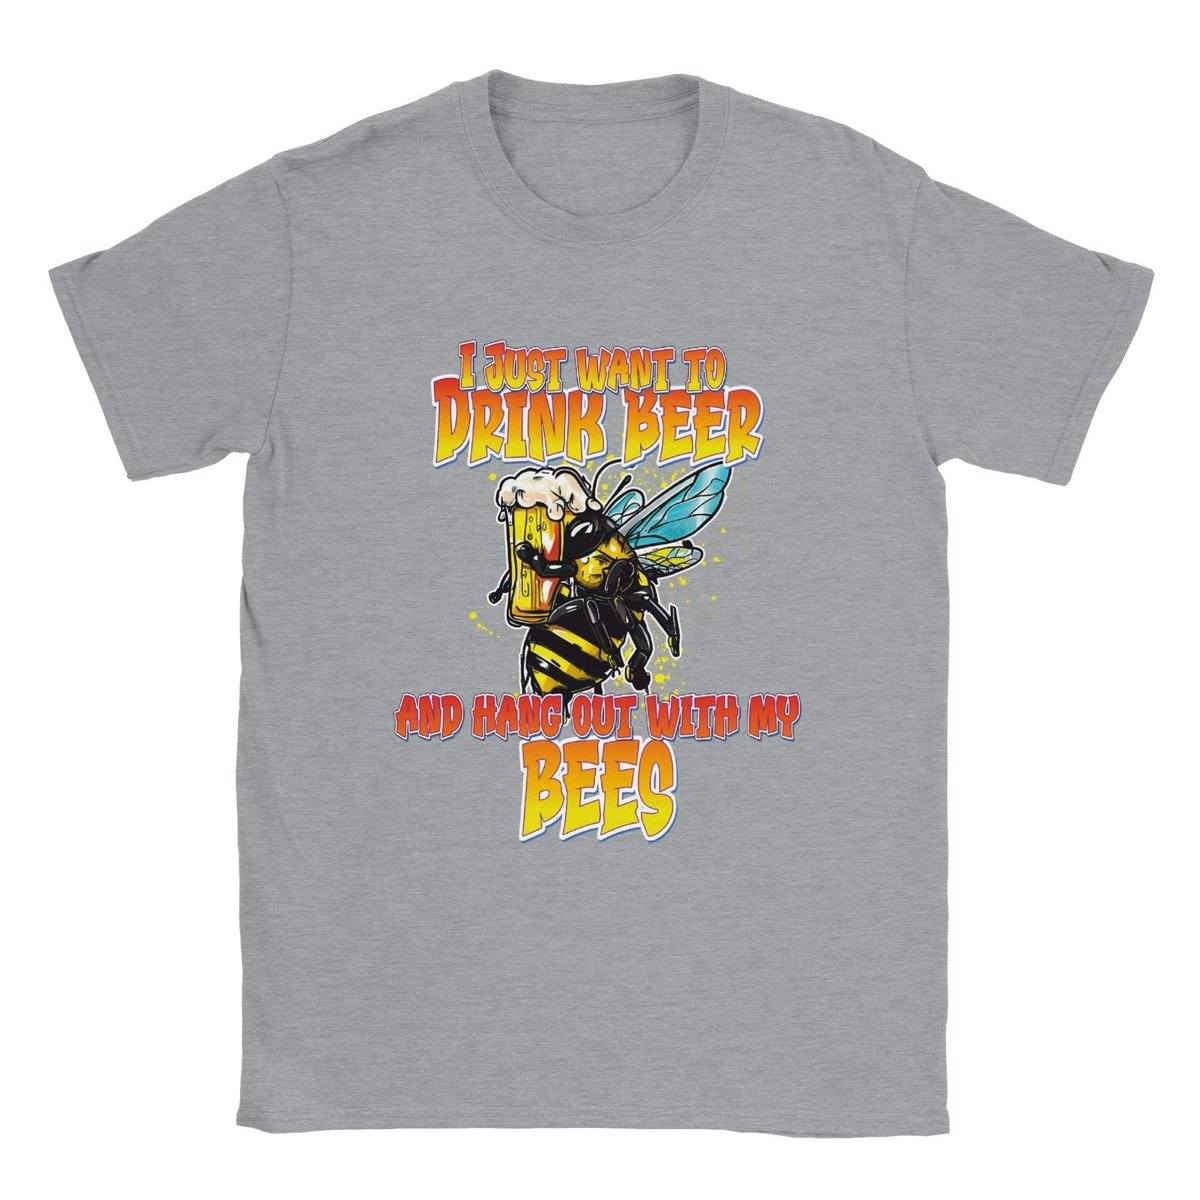 I just want to drink beer and hang out with my bees - Classic Unisex Crewneck T-shirt Australia Online Color